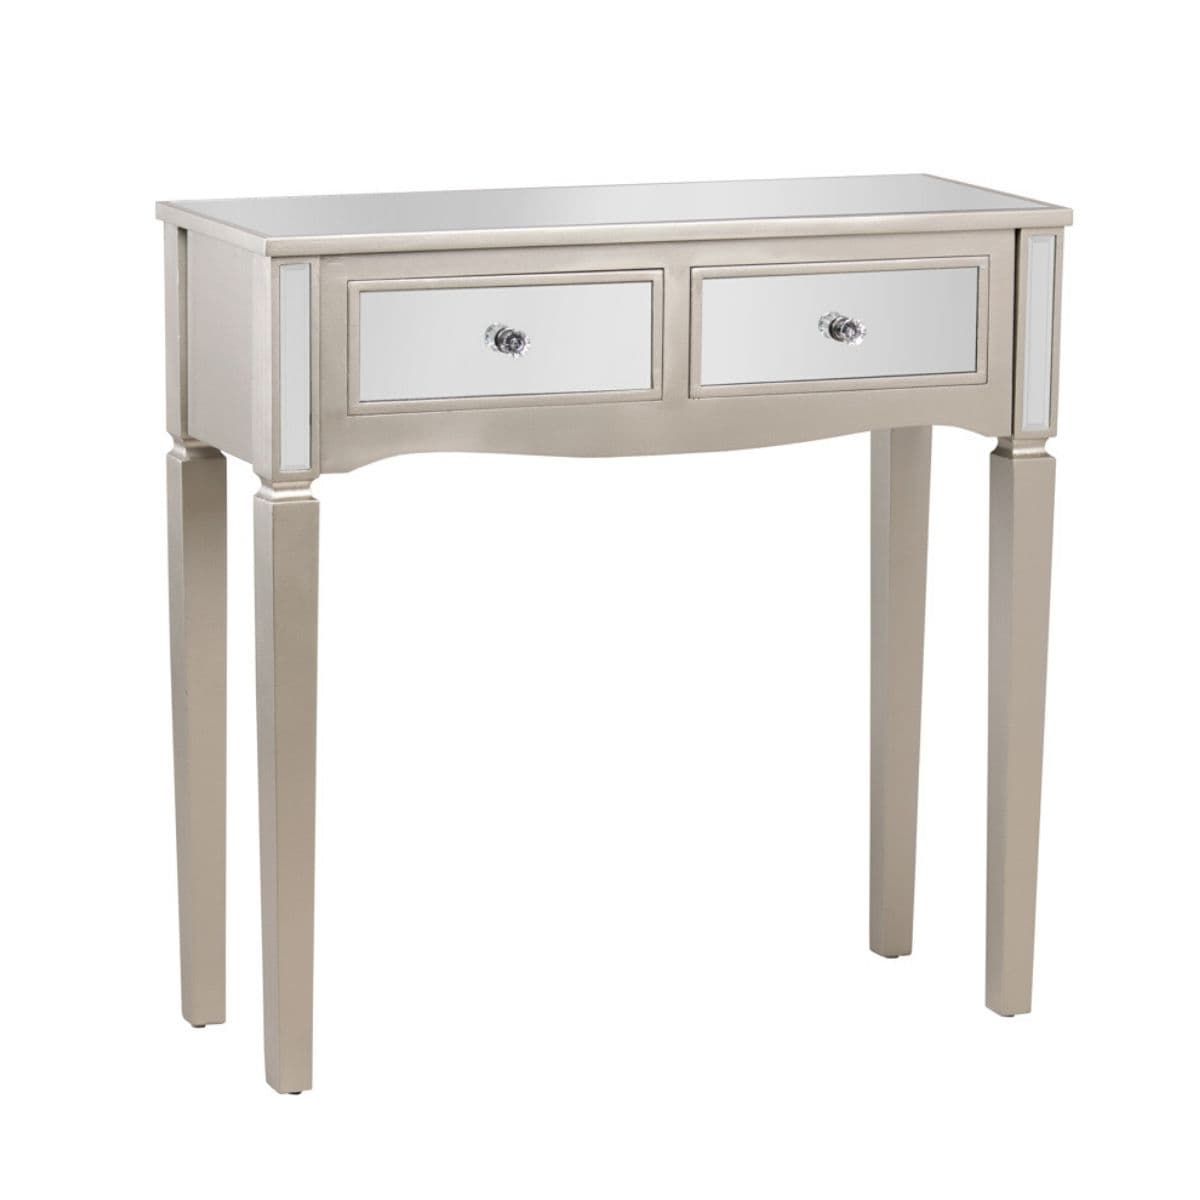 Reflections 2 Drawer Mirrored Console Table – Corcorans Pertaining To Widely Used Mirrored Console Tables (View 7 of 10)